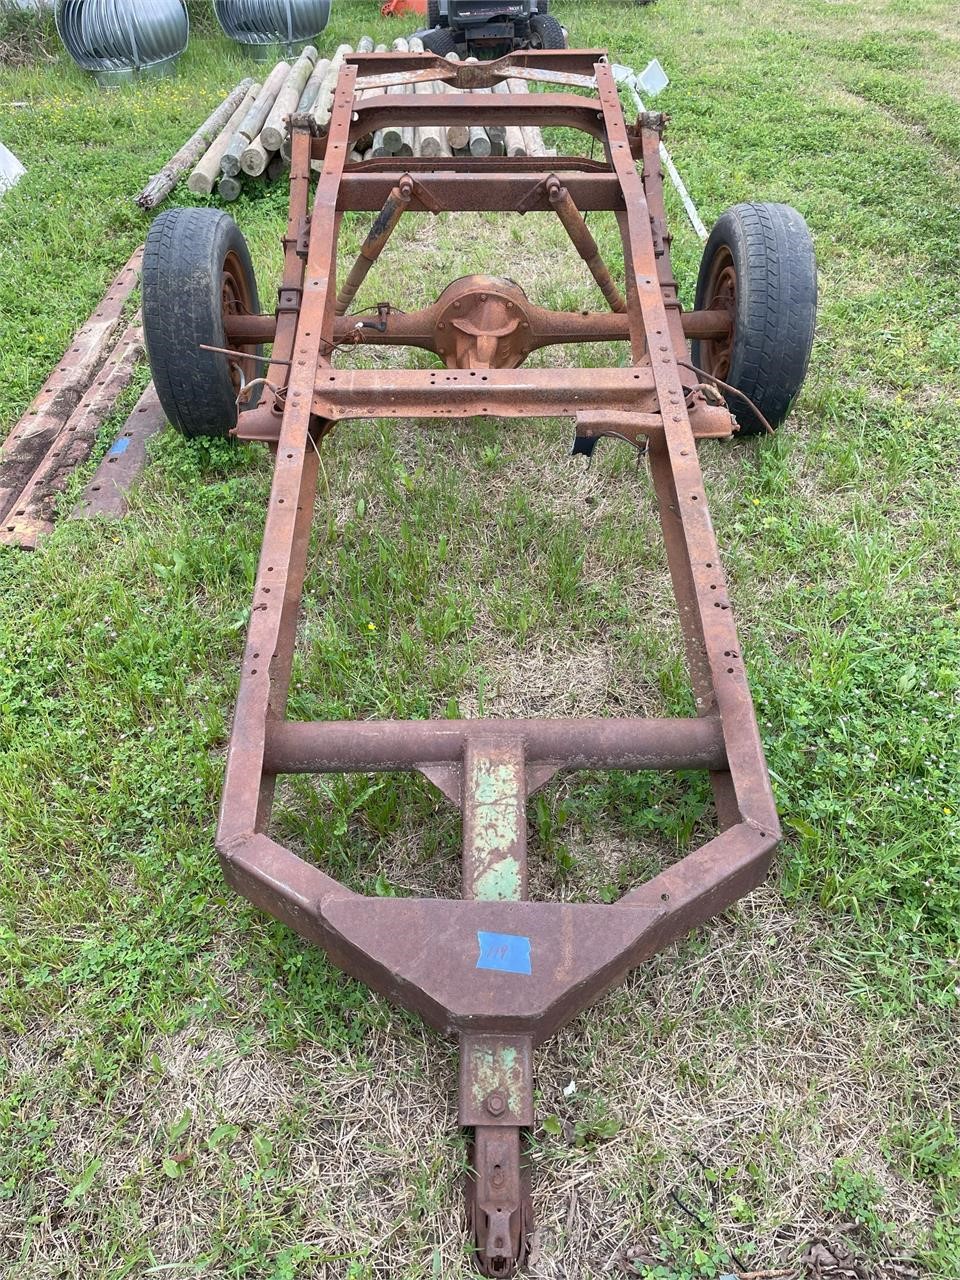 Shop Made Trailer out of a Pickup Frame